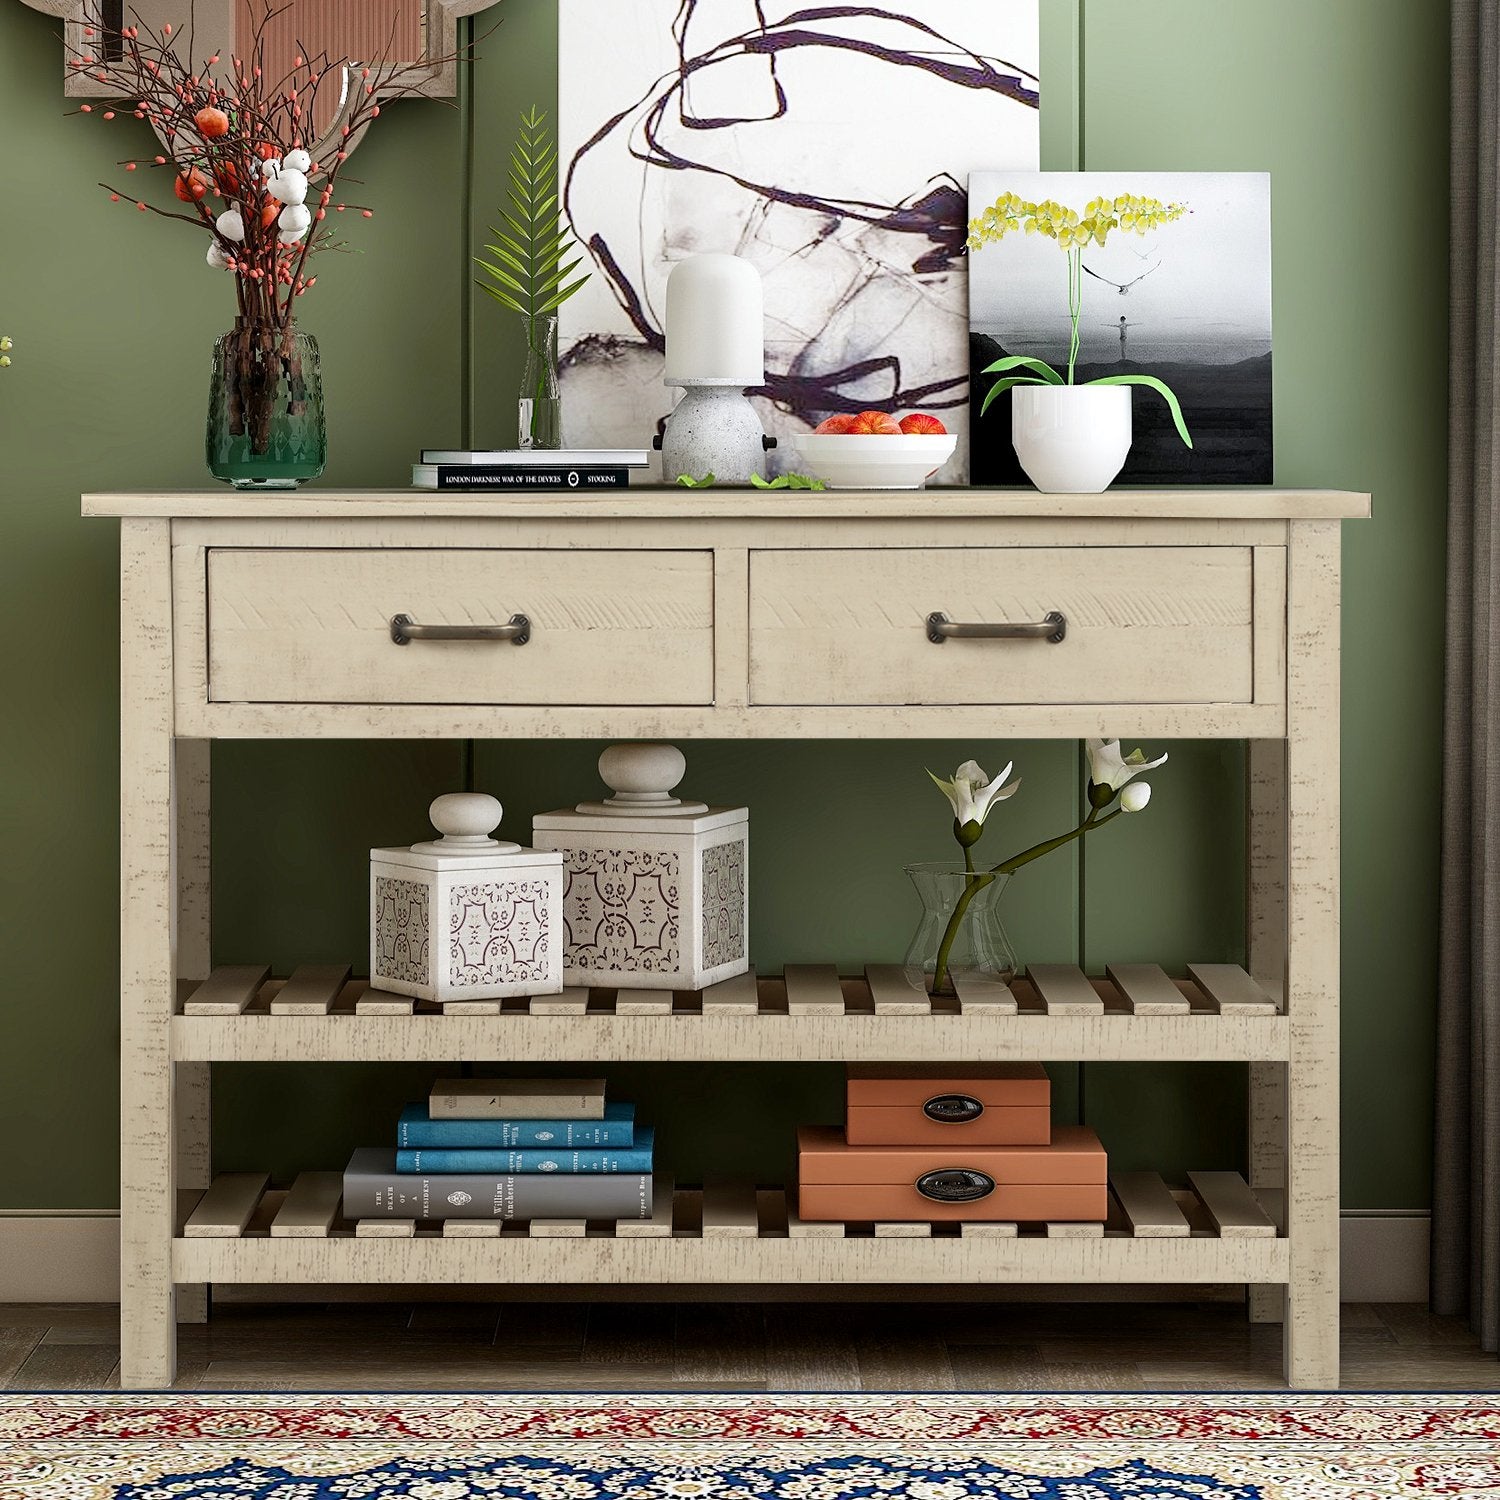 Retro Console Table for Entryway with Drawers and Shelf Living Room Furniture